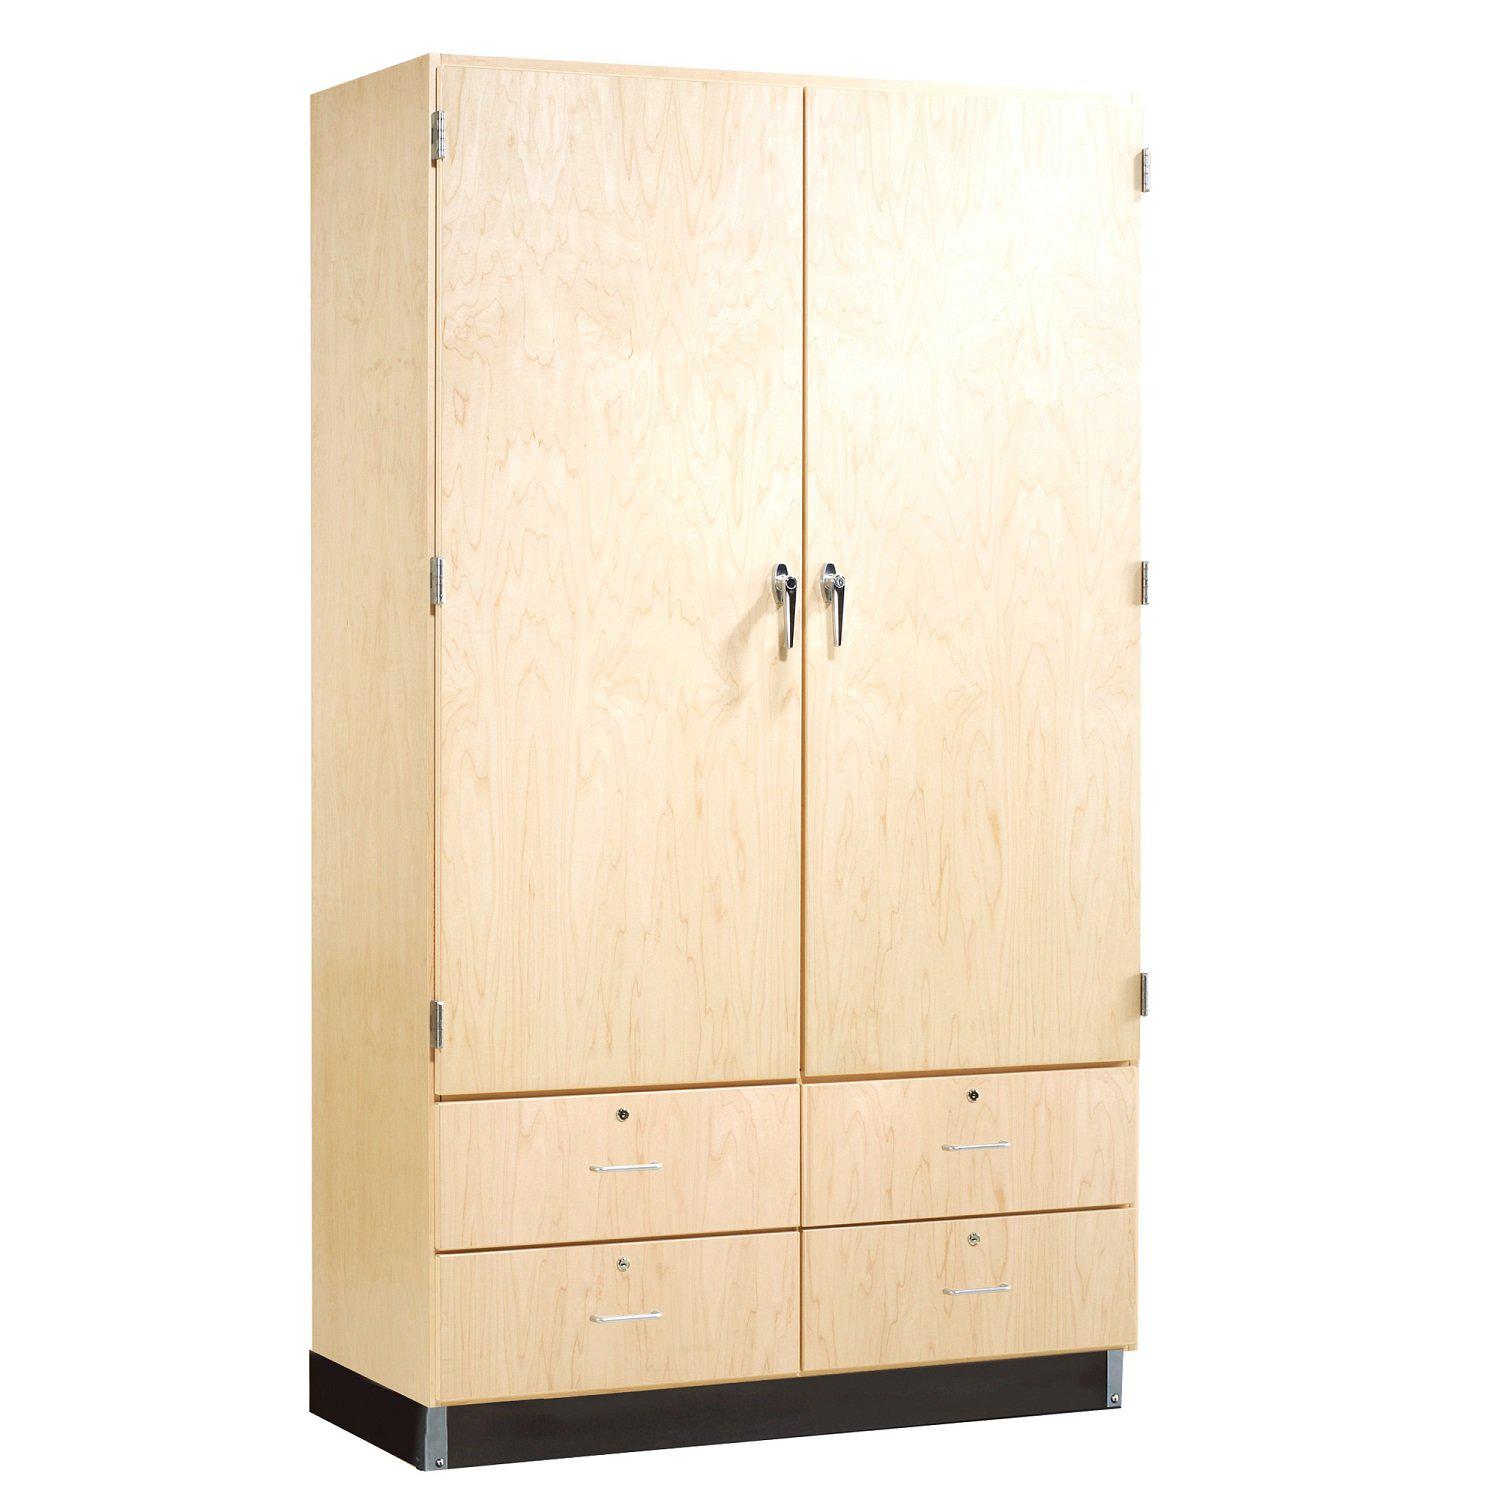 Tall Cabinet With Drawers